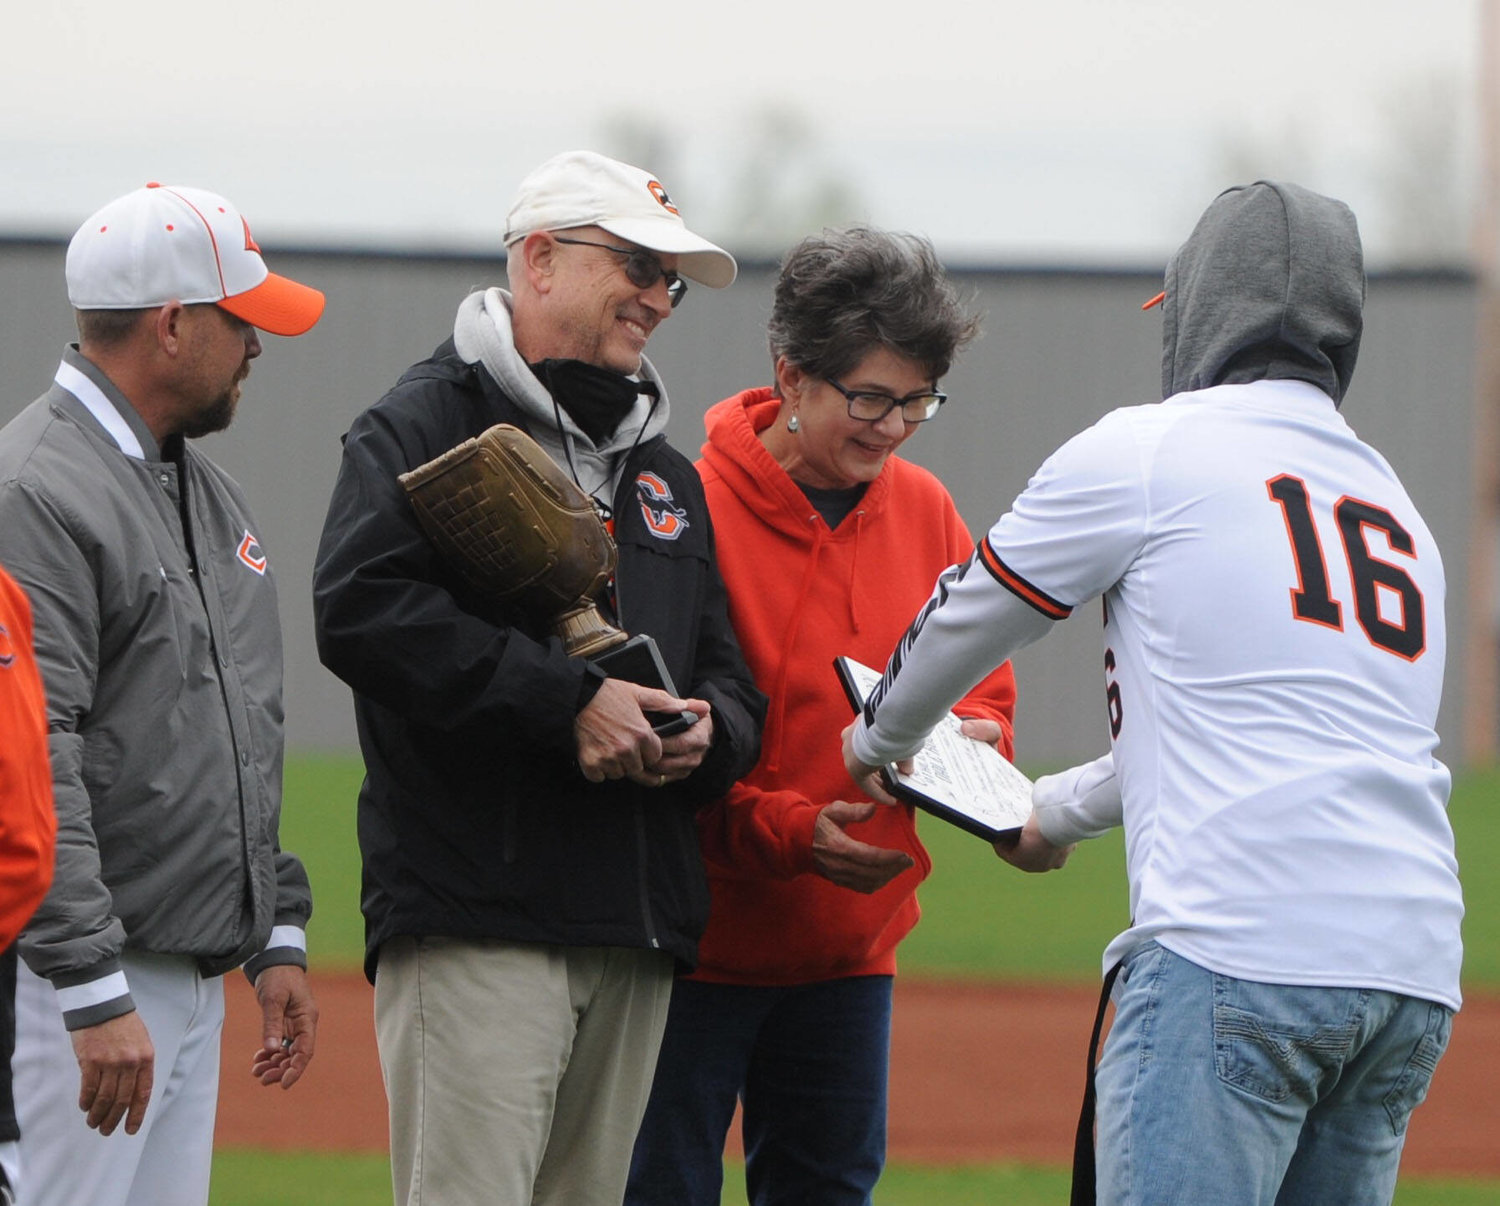 Dale Rucker and wife Linda were presented with a commemorative plaque during his final season as Cascade athletic director.